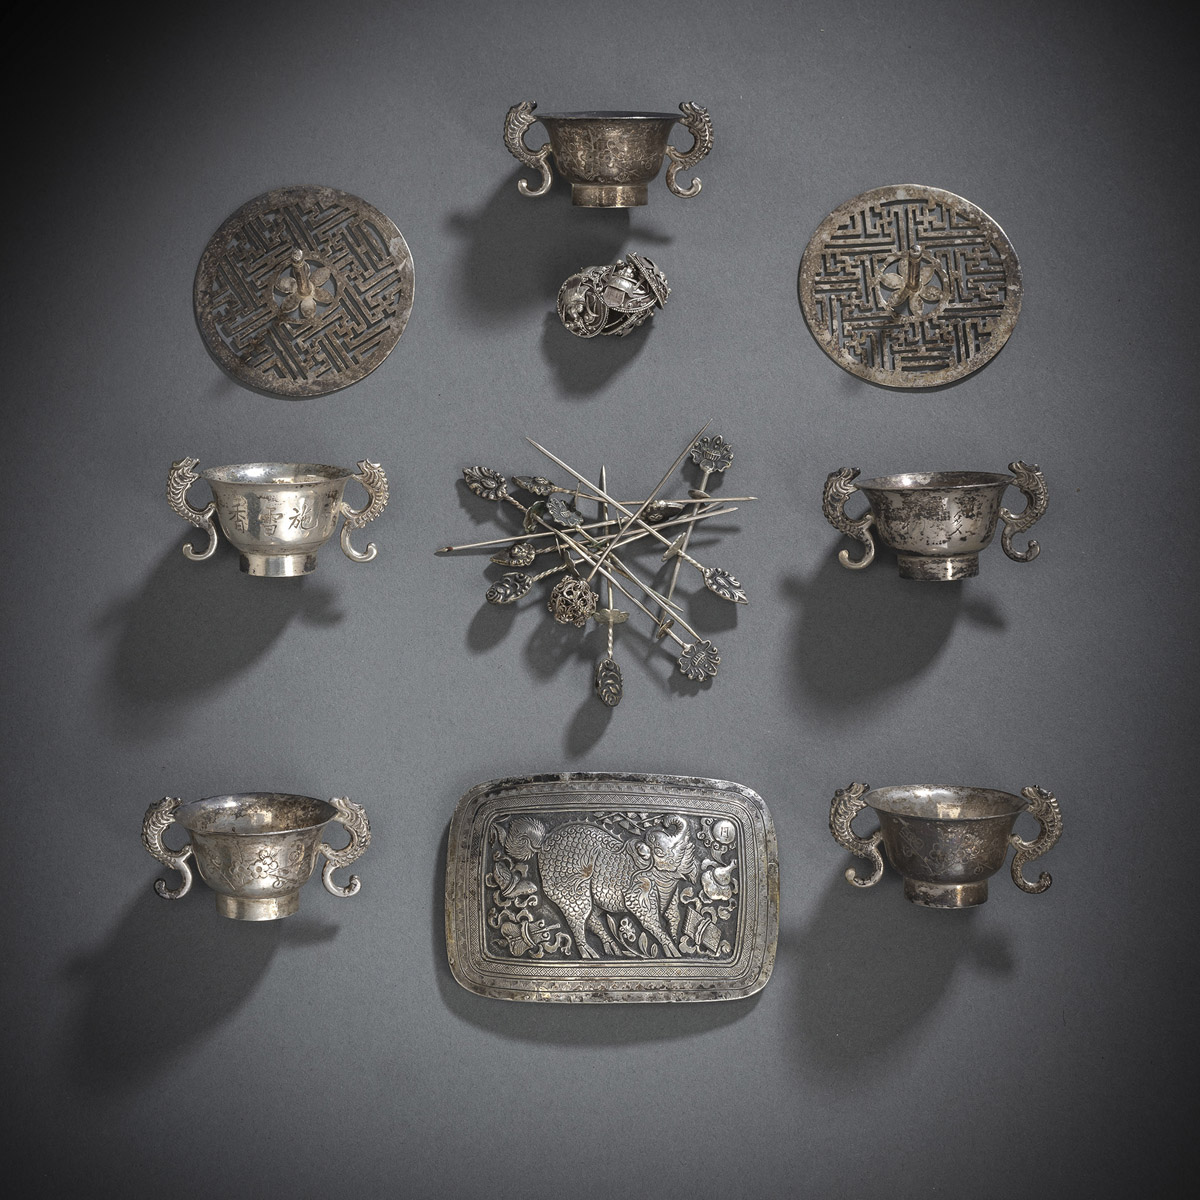 A GROUP OF SILVER WORKS WITH WINE CUPS, KNOBS, A BELT BUCKLE AND SILVER TOOTHPICKS